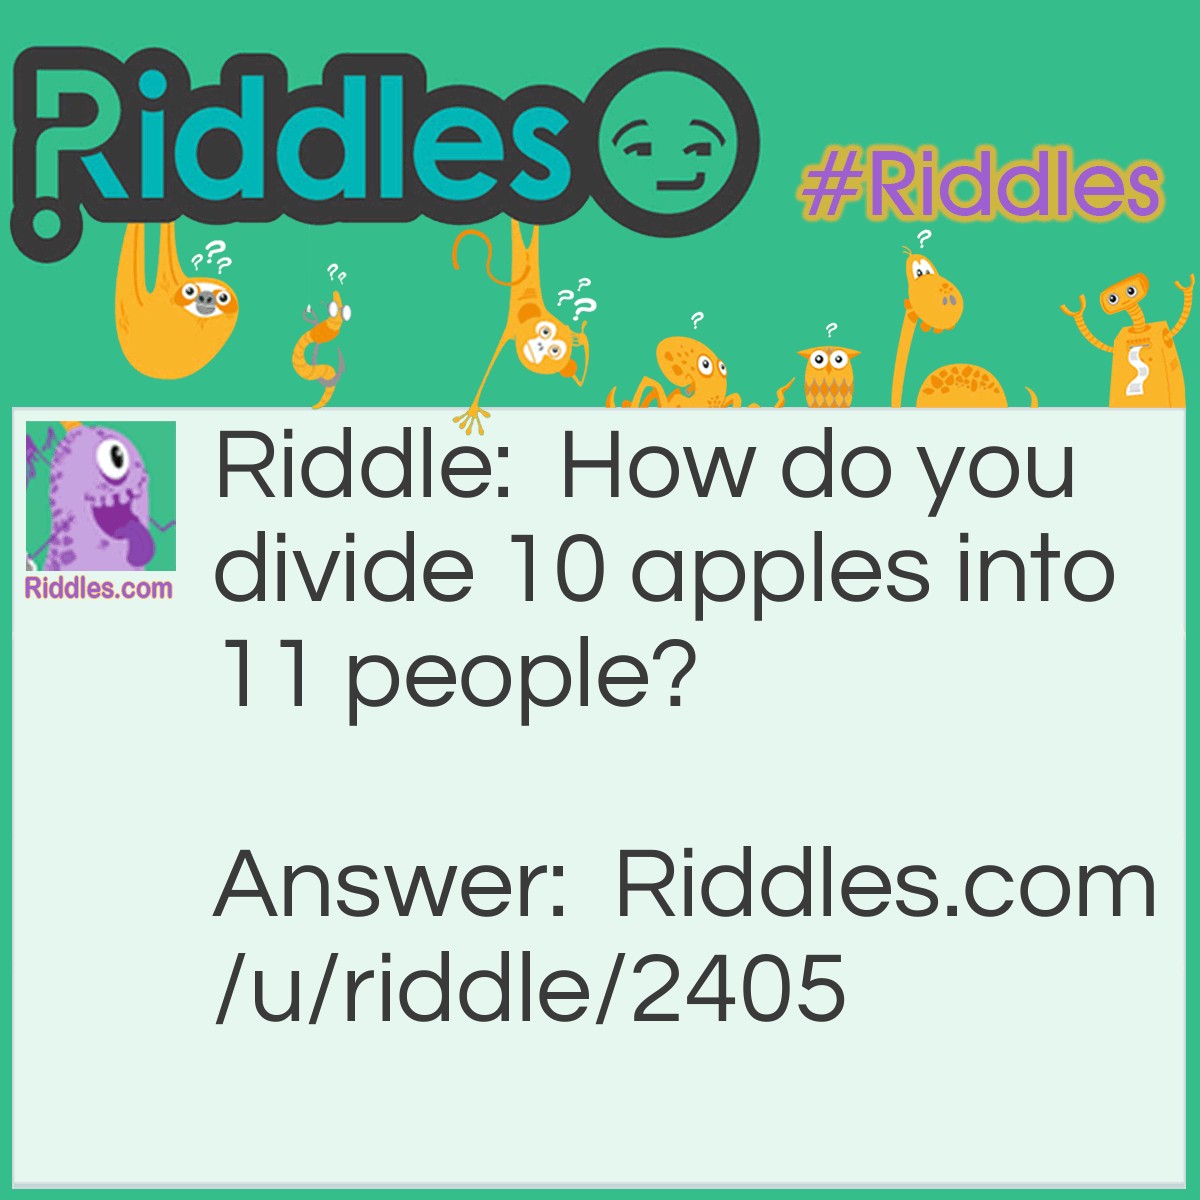 Riddle: How do you divide 10 apples into 11 people? Answer: You make applesauce.